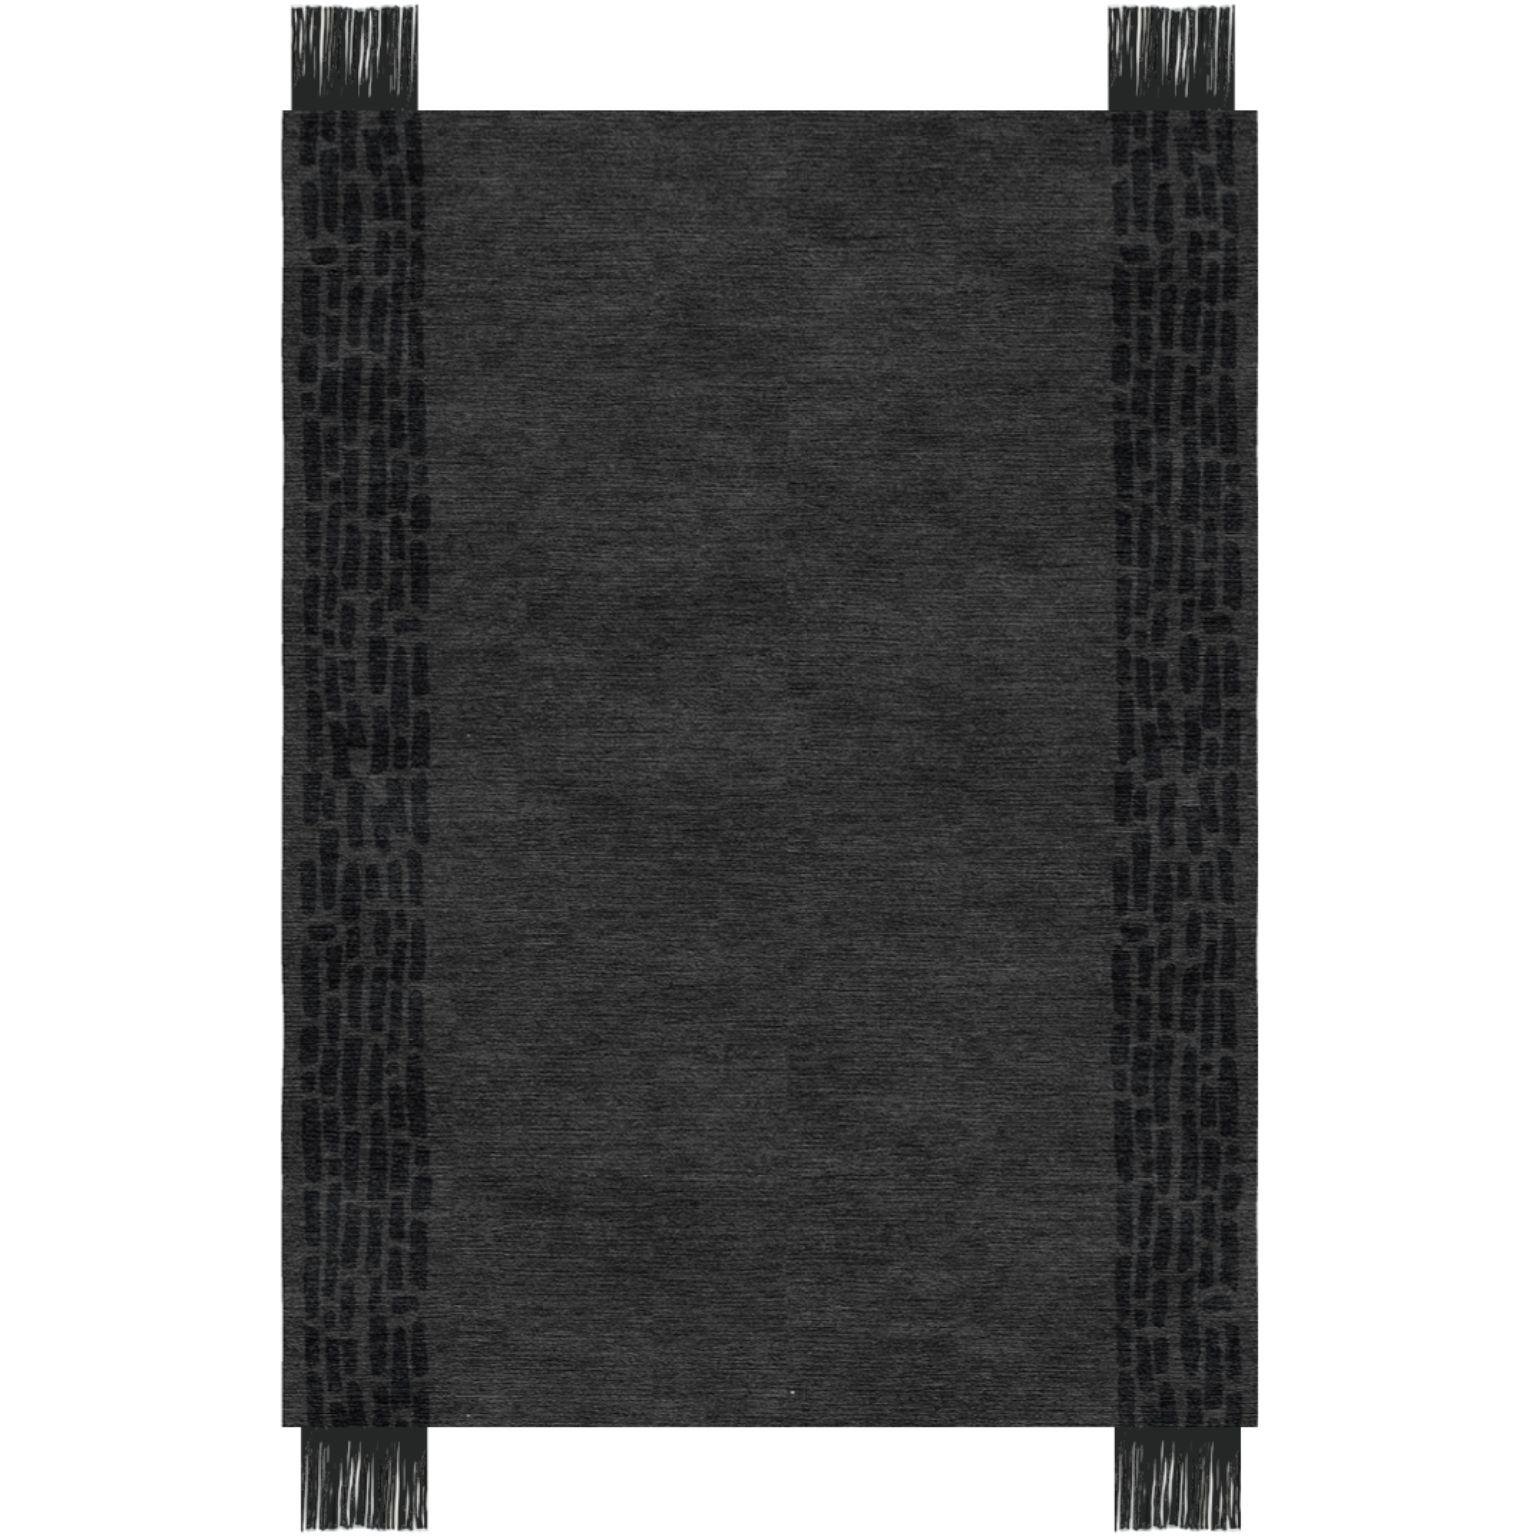 Roads Small Rug by Art & Loom
Dimensions: D243.4 x H304.8 cm
Materials: Allo & Chinese silk with fringe—(2) pile heights
Quality (Knots per Inch): 100
Also available in different dimensions.

Samantha Gallacher has always had a keen eye for